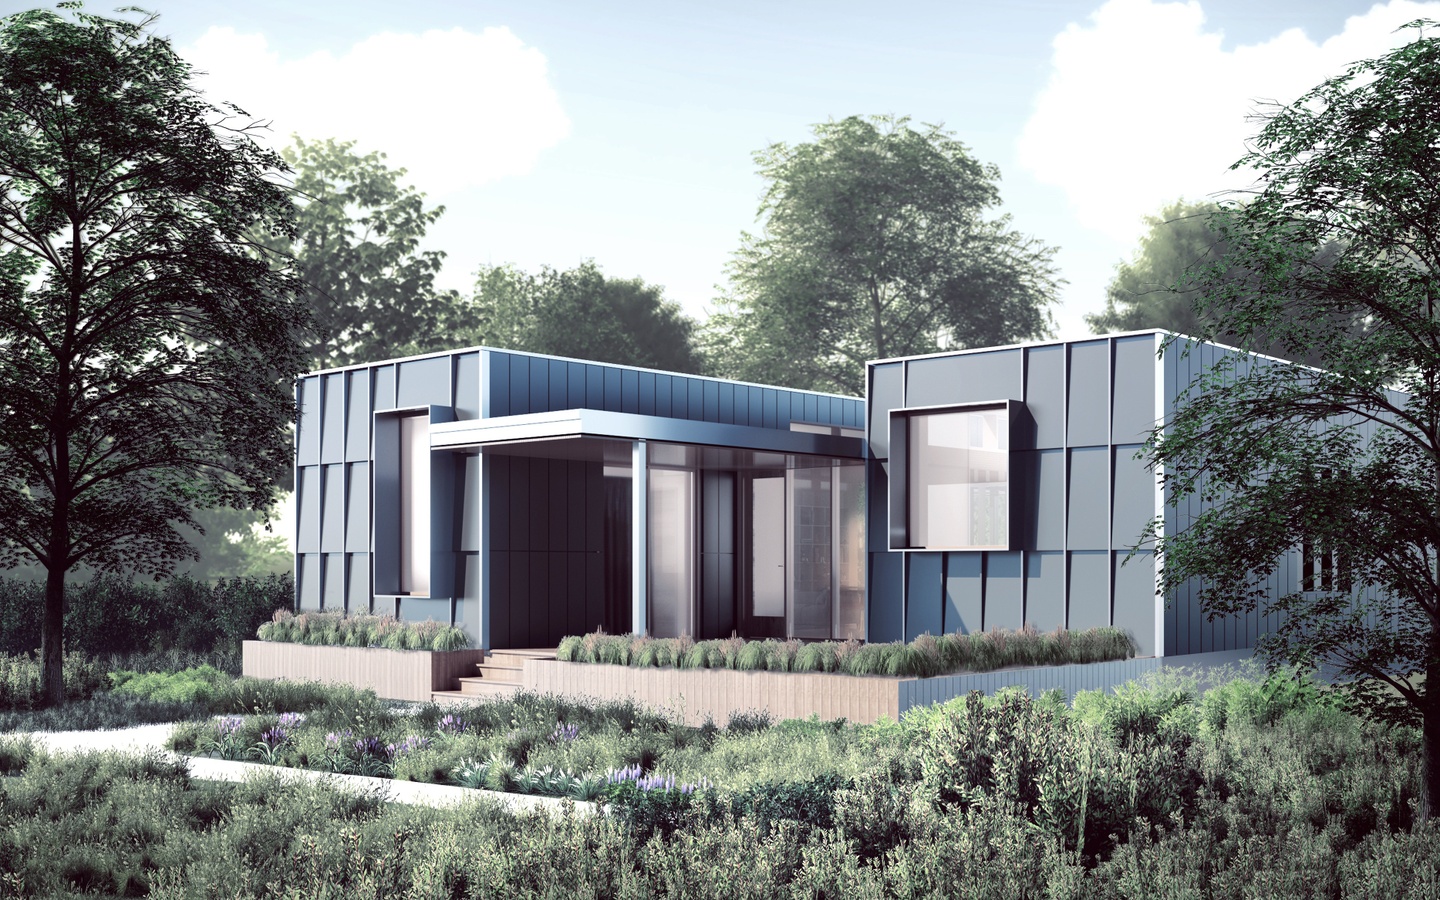 Rendering of the exterior facade of a modular home, with two rectangular wings with rectangular panels framing the entrance. Lush landscaping is in front of the home, with trees to the sides.